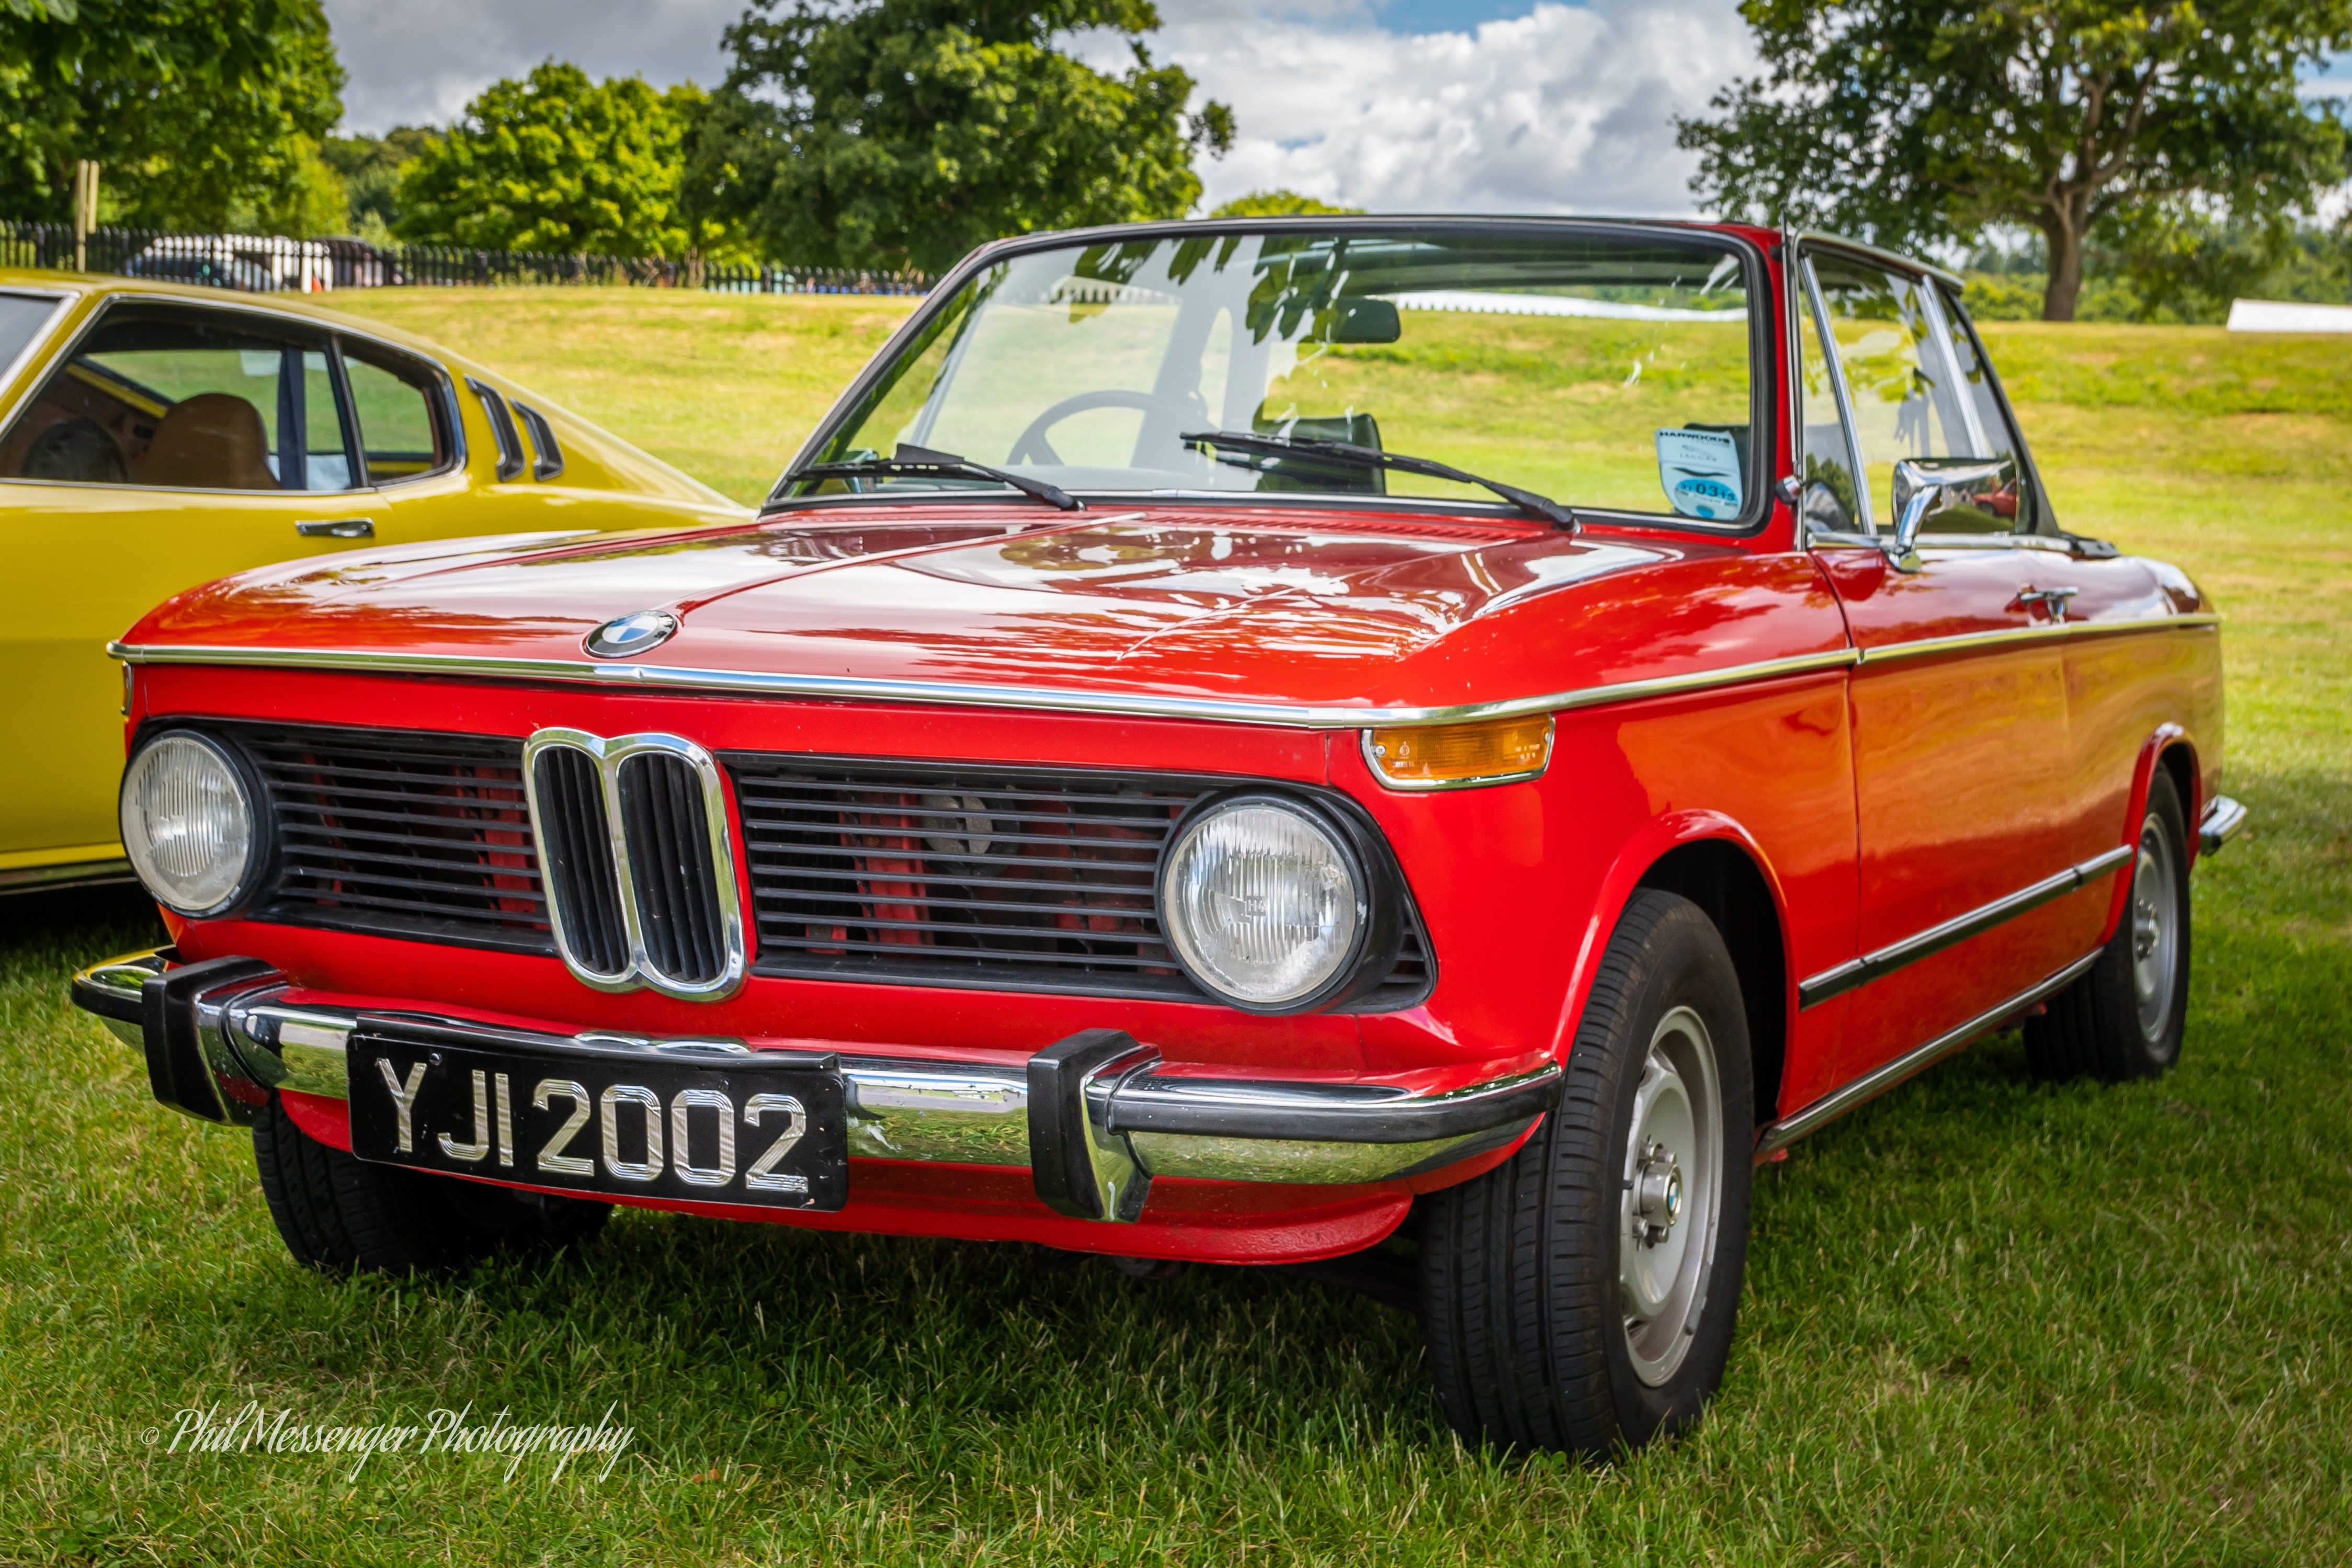 A perfect example of a 1973 BMW 2002 Cabriolet.